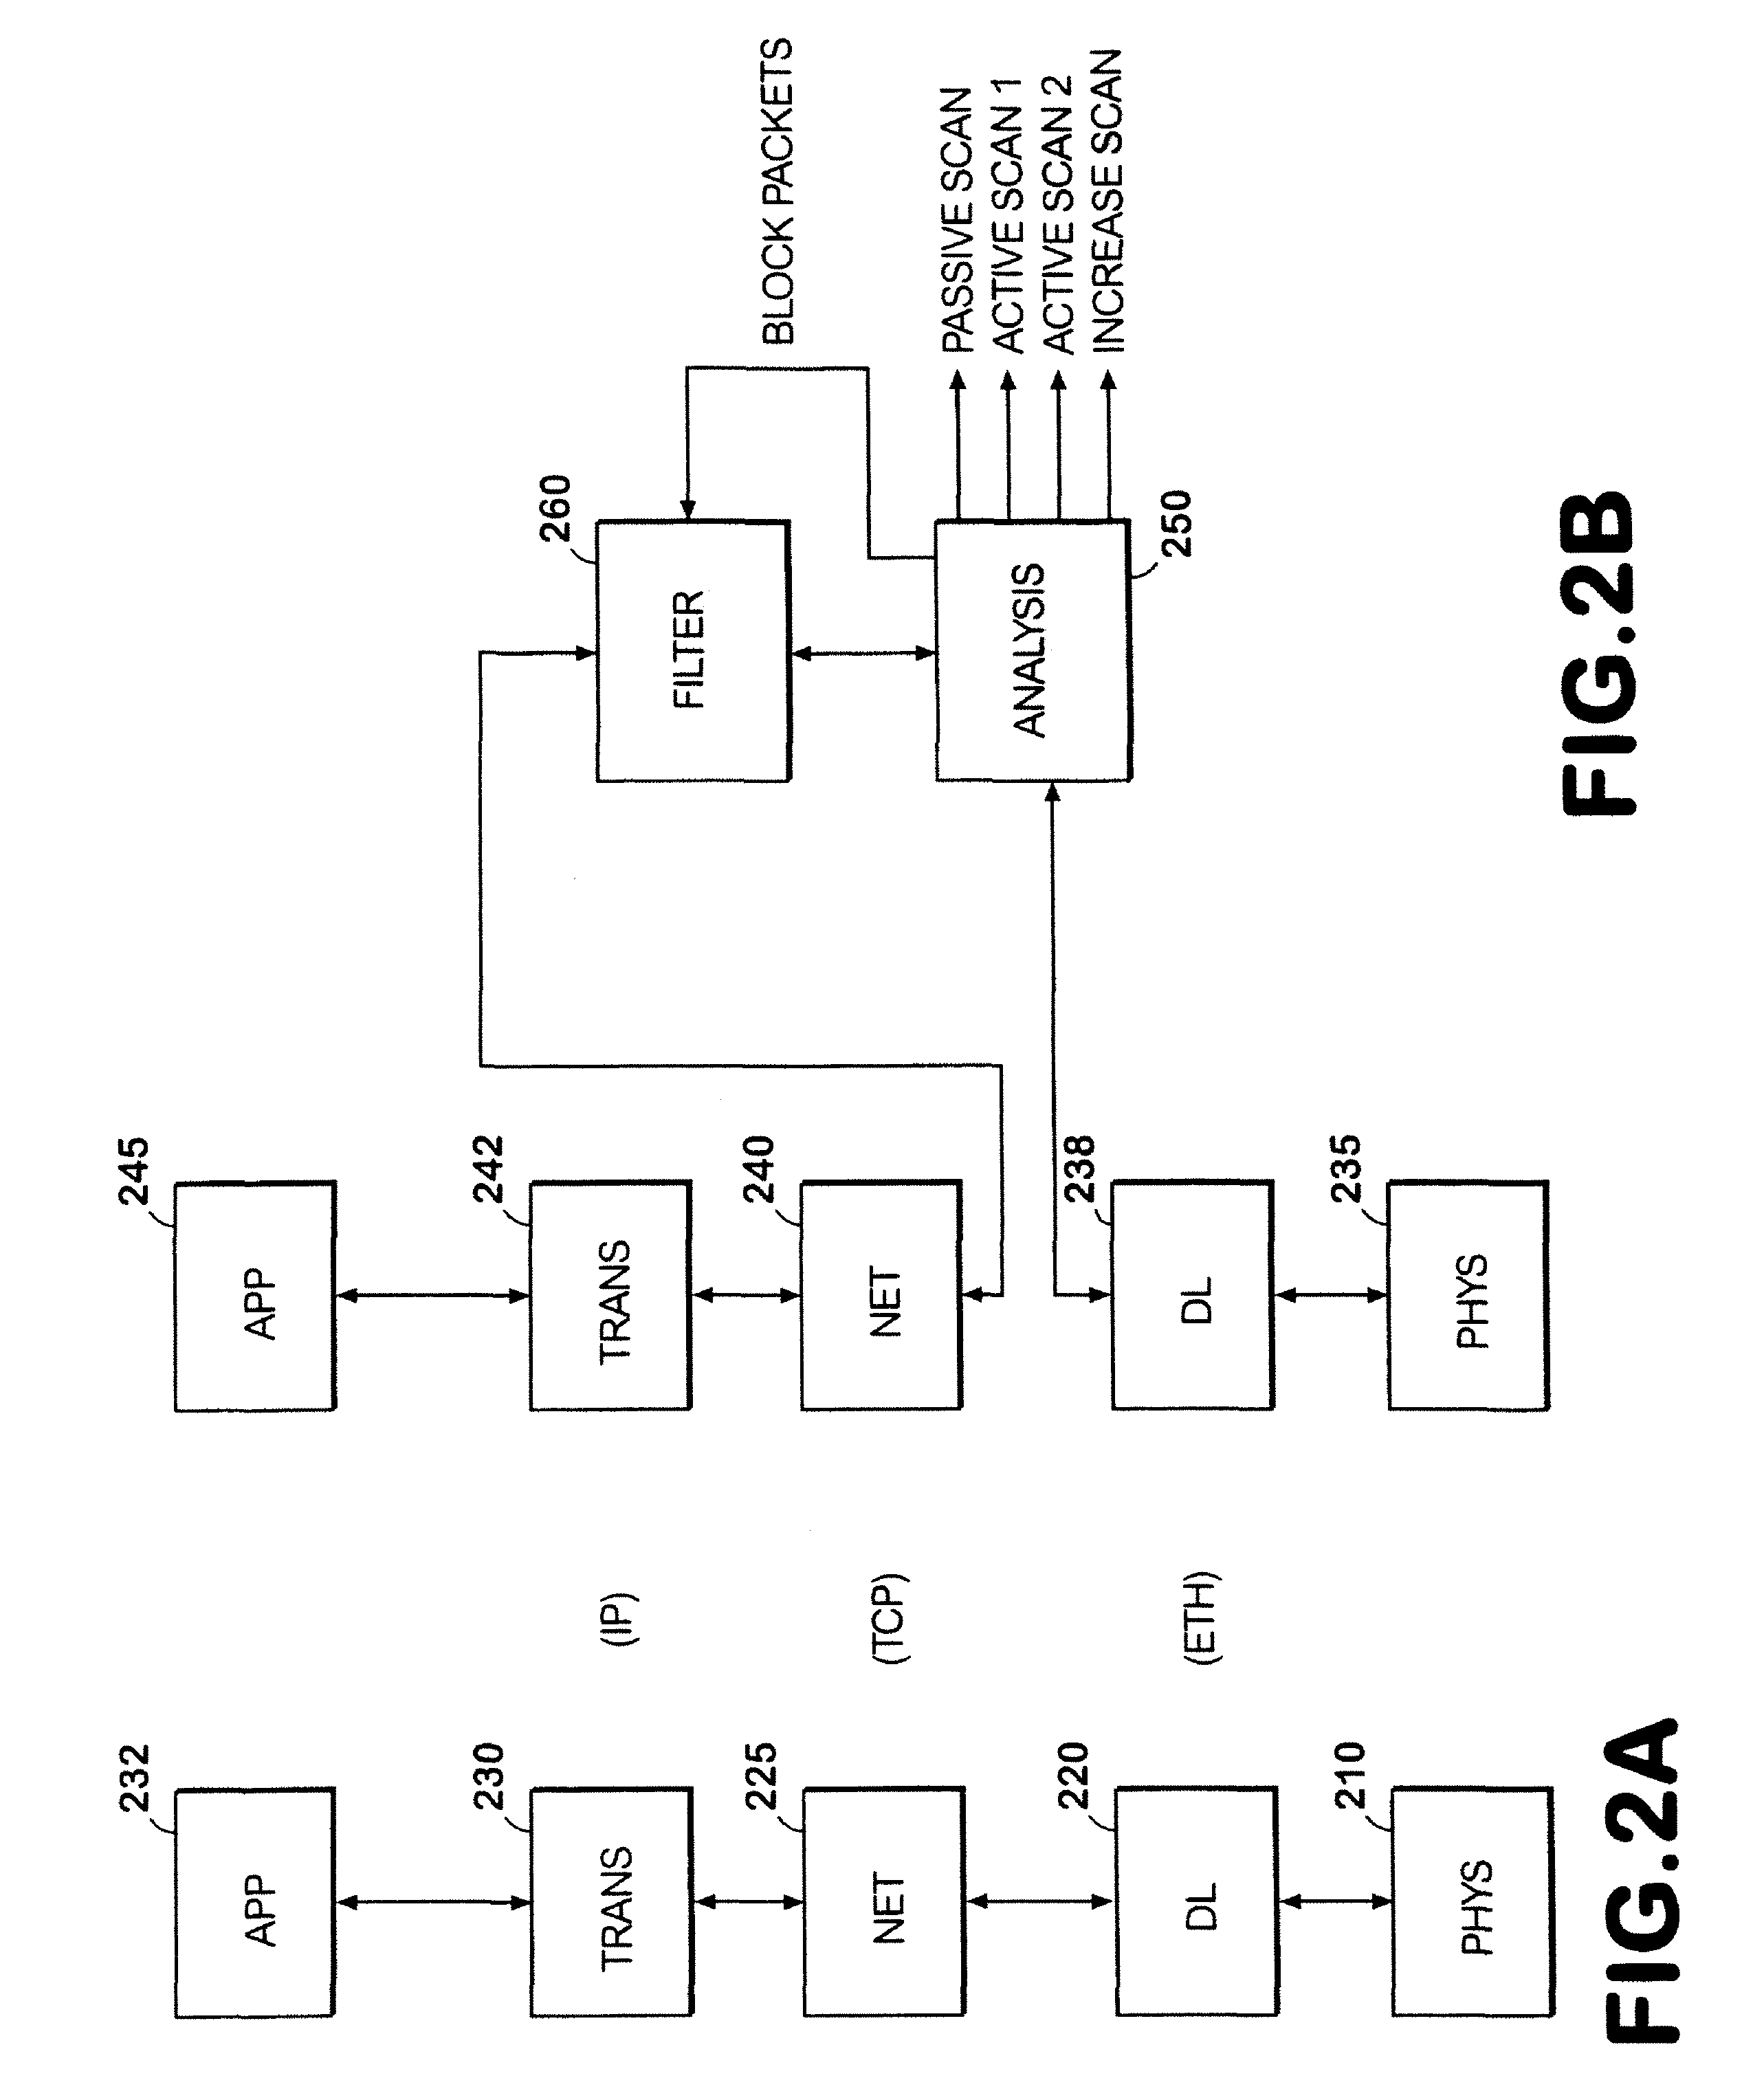 Method and apparatus for providing network and computer system security